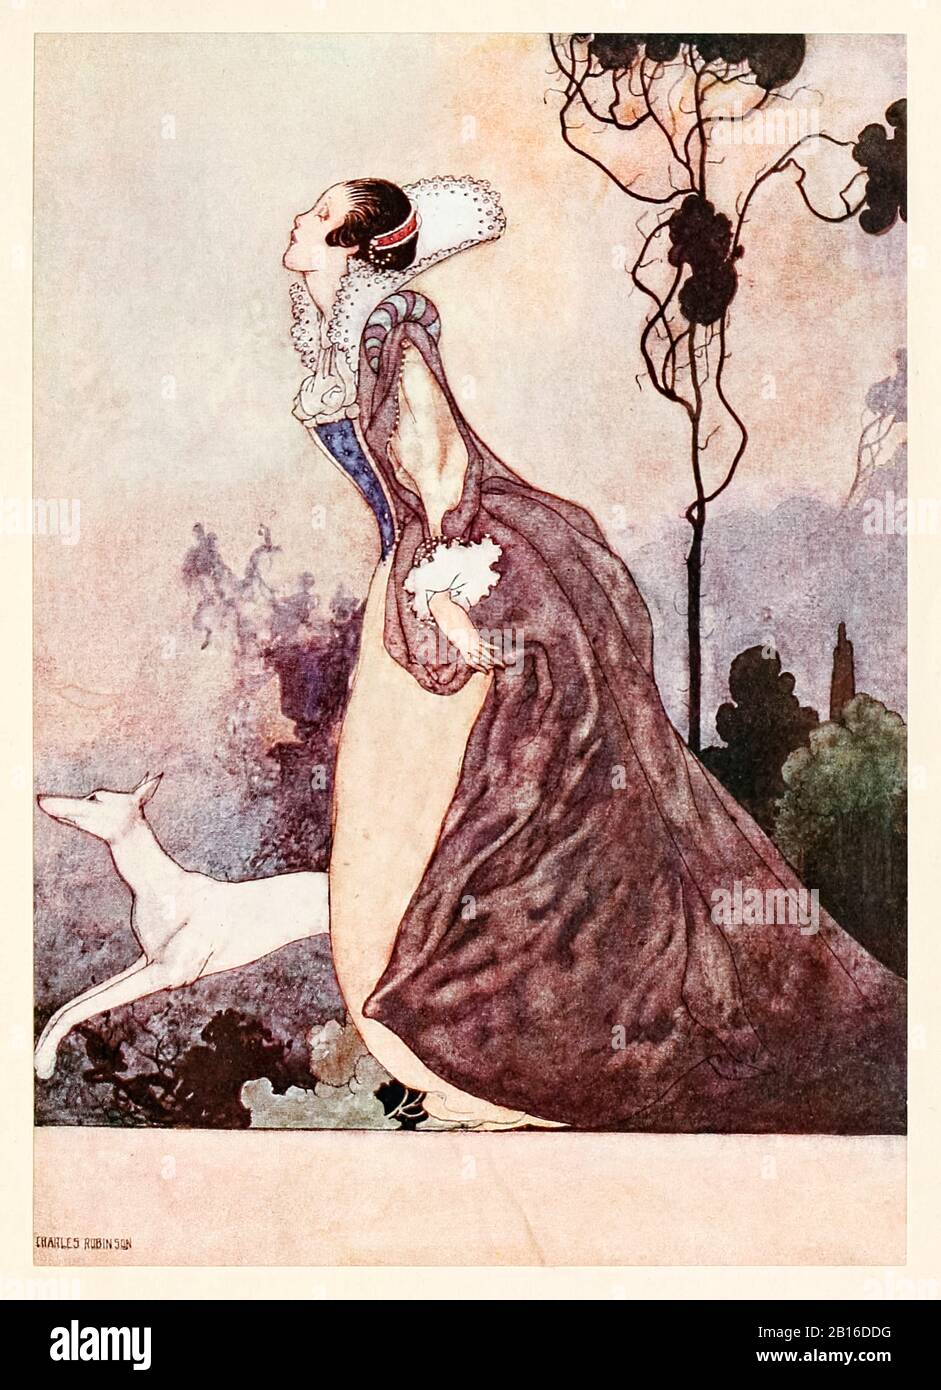 “Some glory in their birth” from ‘All things in Love’ in The Songs and Sonnets of William Shakespeare illustrated by Charles Robinson (1870-1937). See more information below. Stock Photo